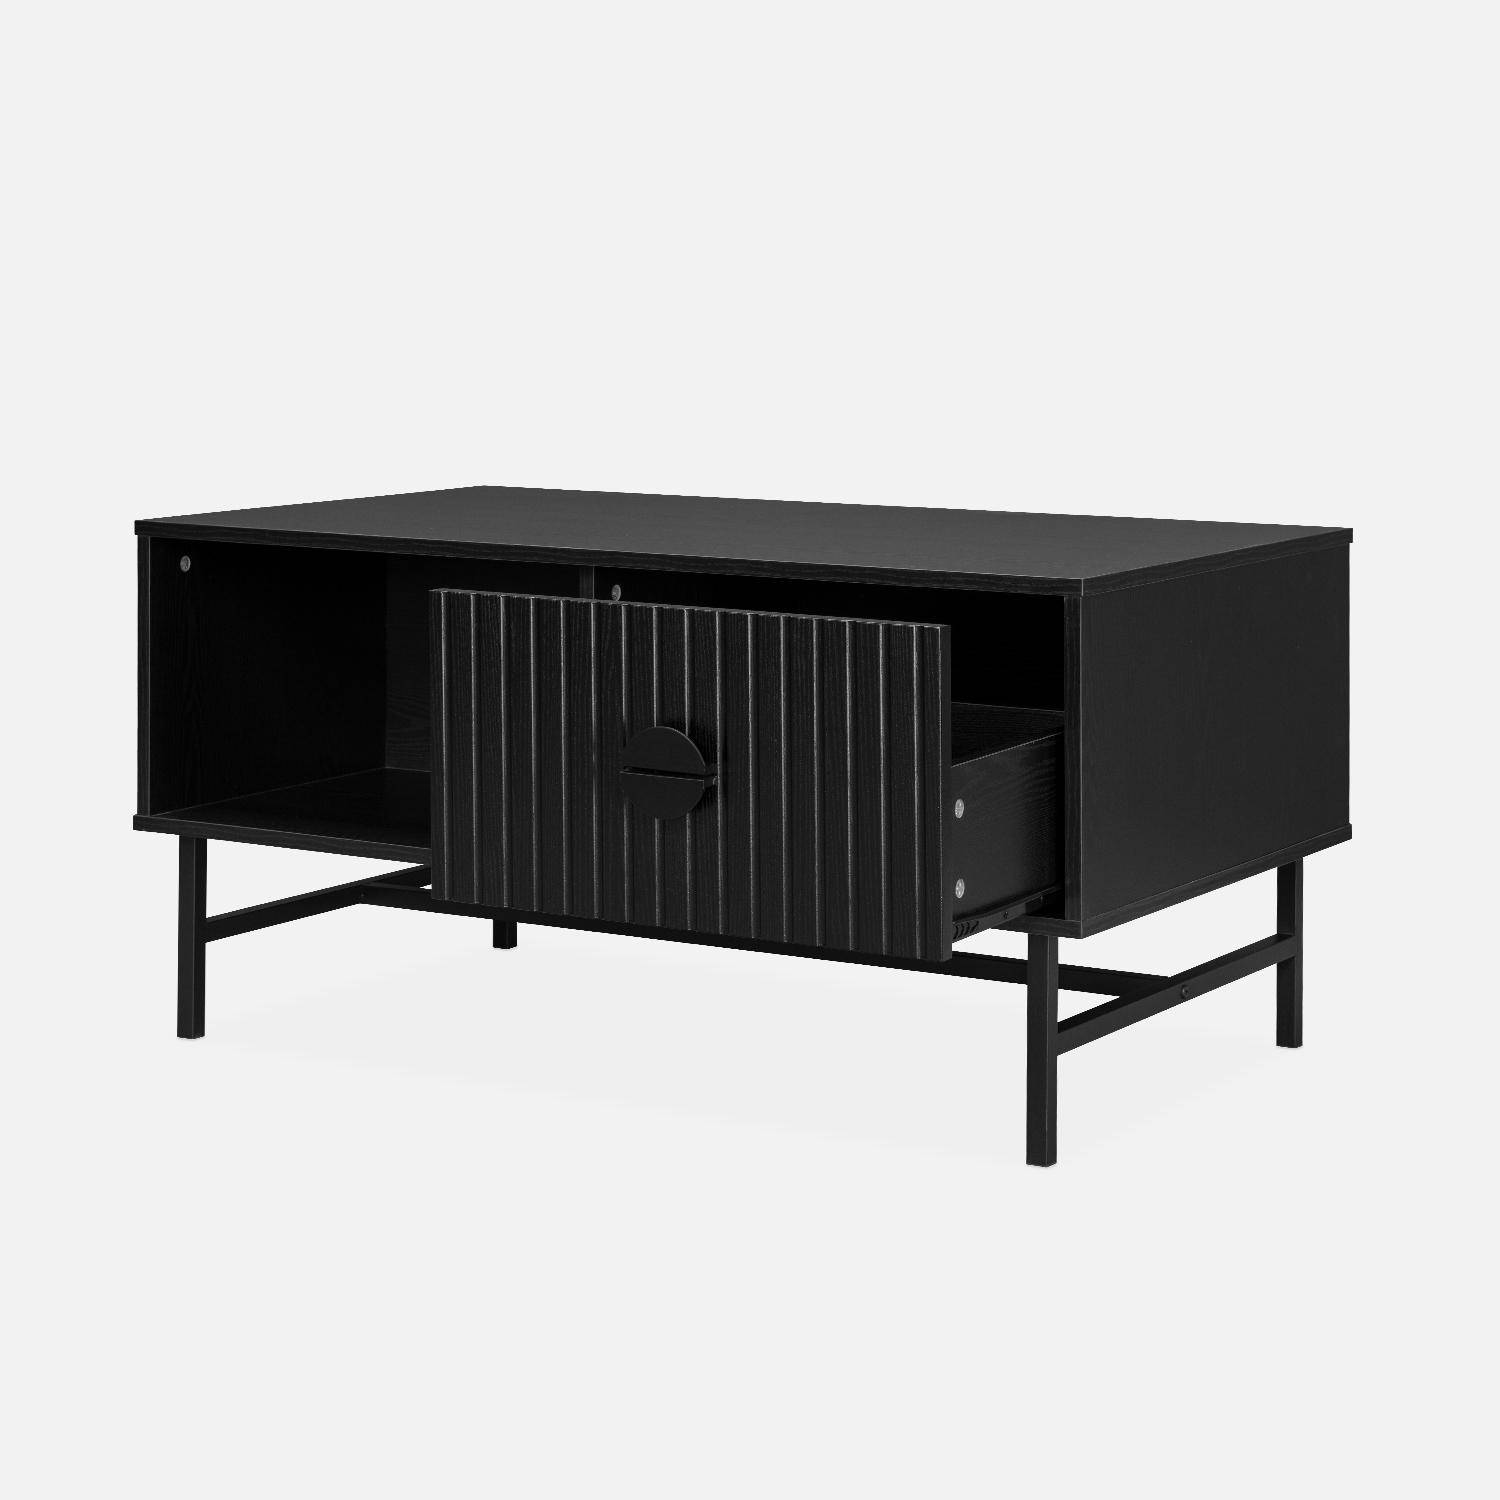 Coffee table with one drawer and one storage nook, ridged effect, industrial style, 100x59x50.2cm - Bazalt - Black,sweeek,Photo7